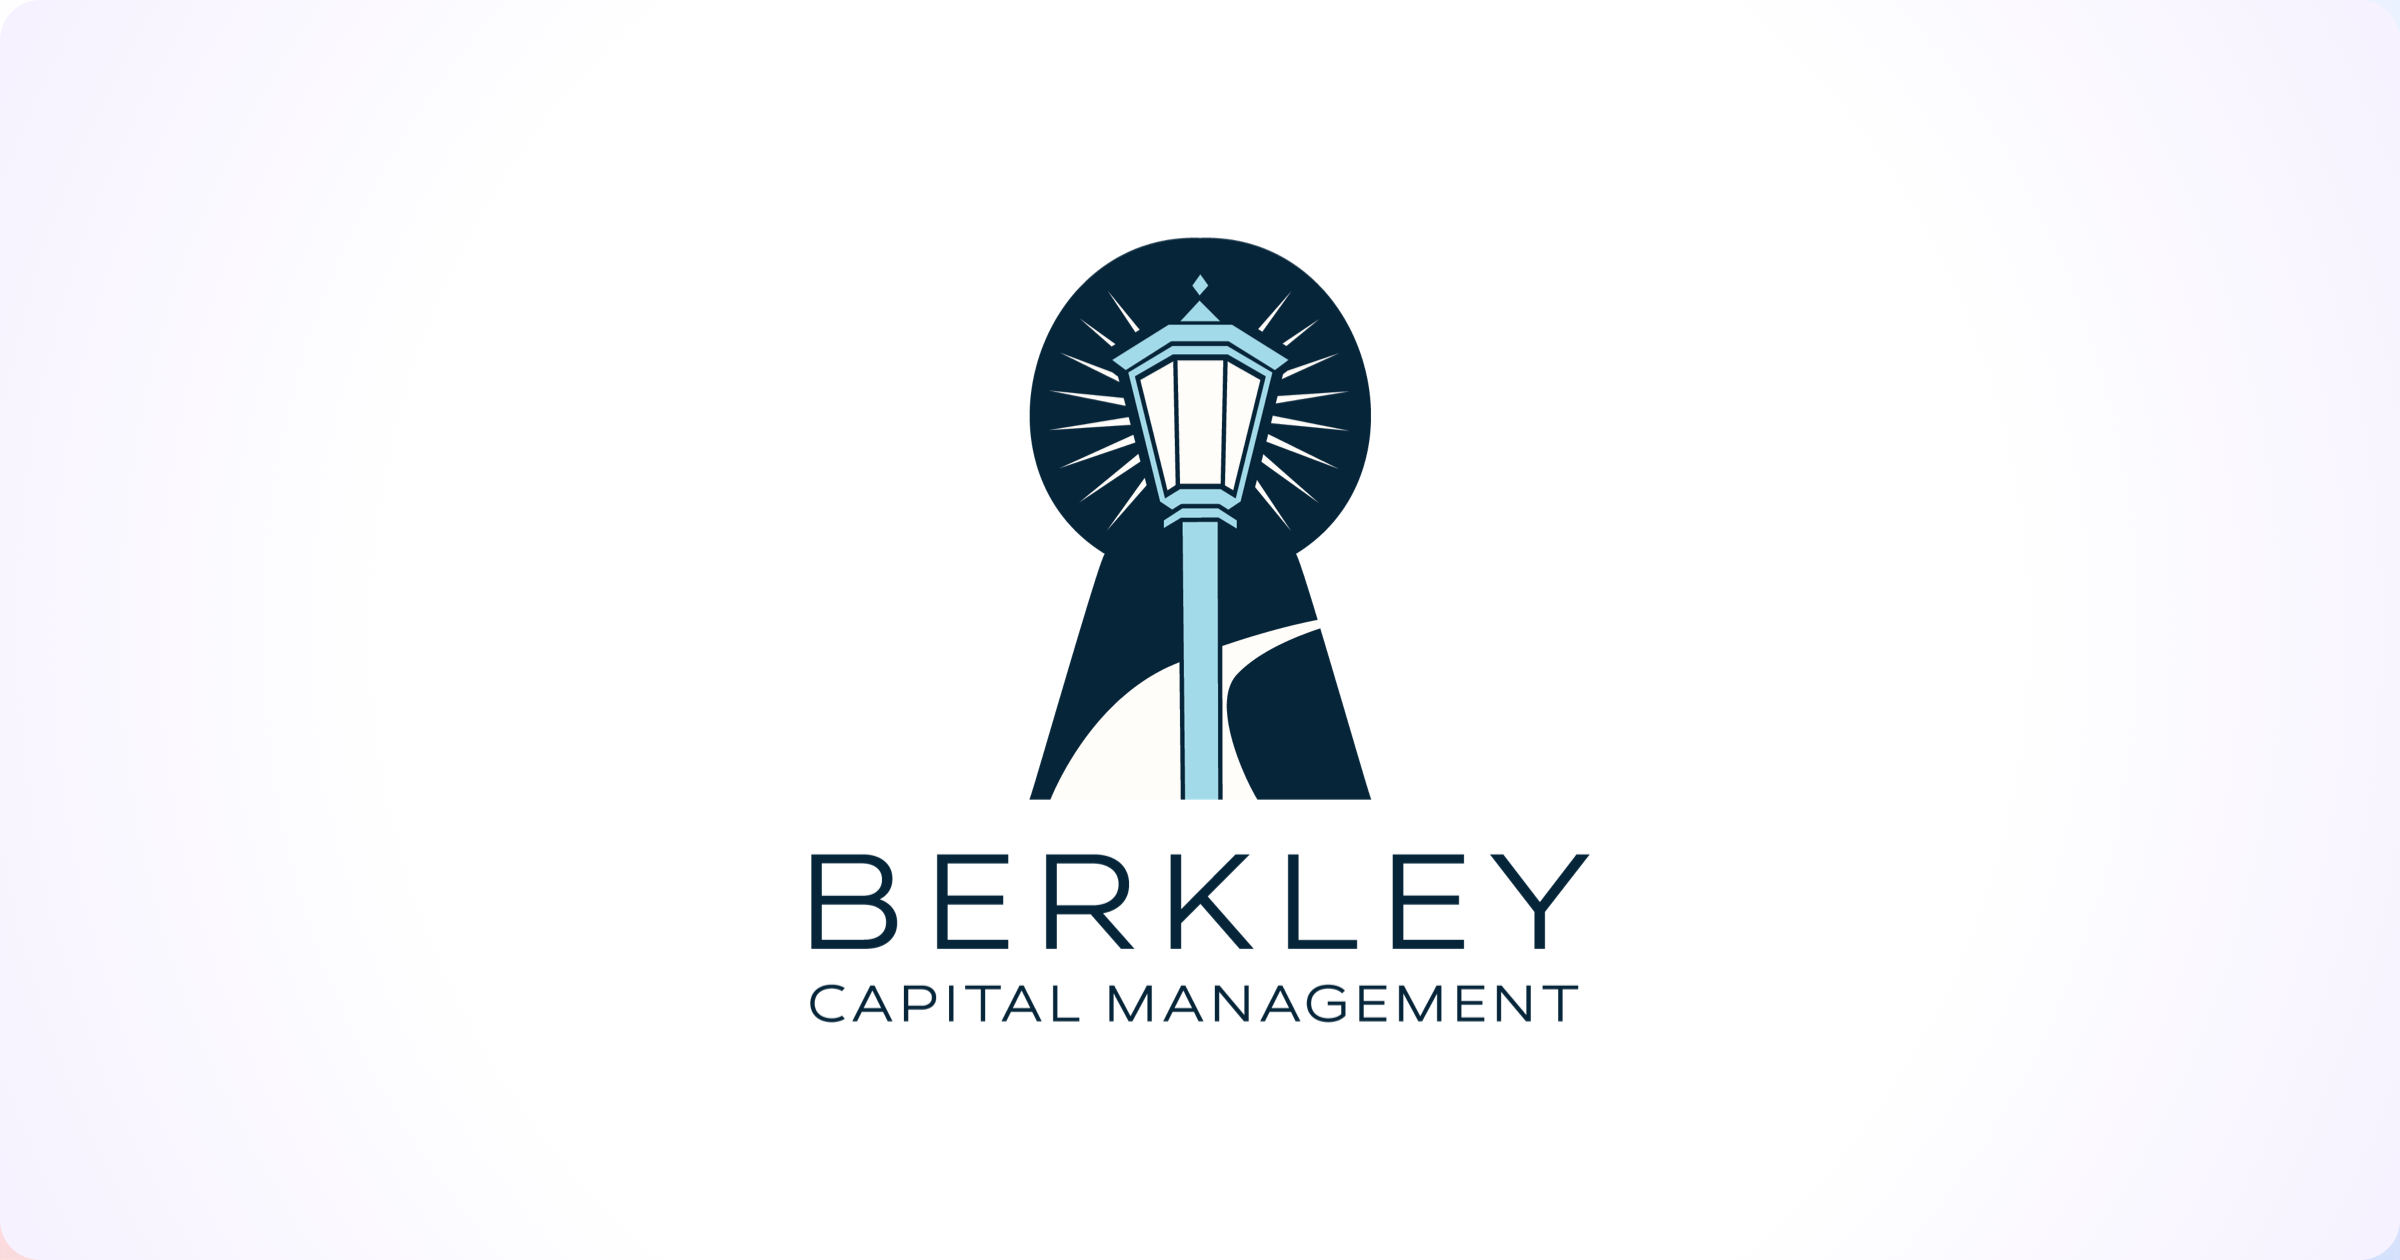 Berkley Capital uses the Circle Account for fast, easy access to decentralized finance (DeFi)